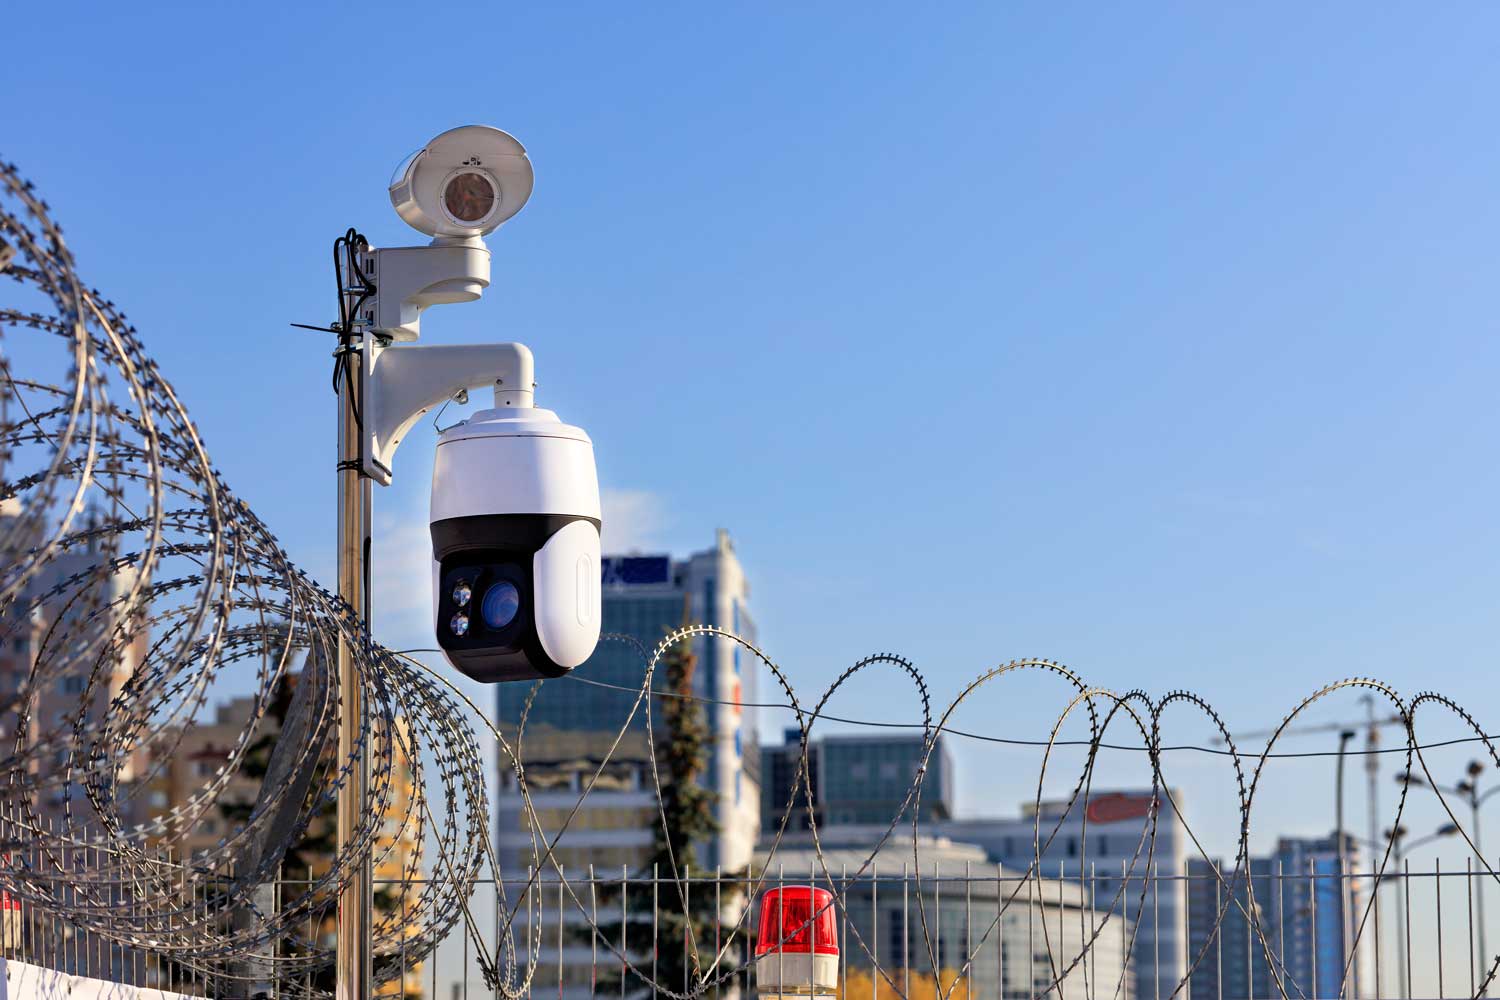 Industrial Security Camera Systems